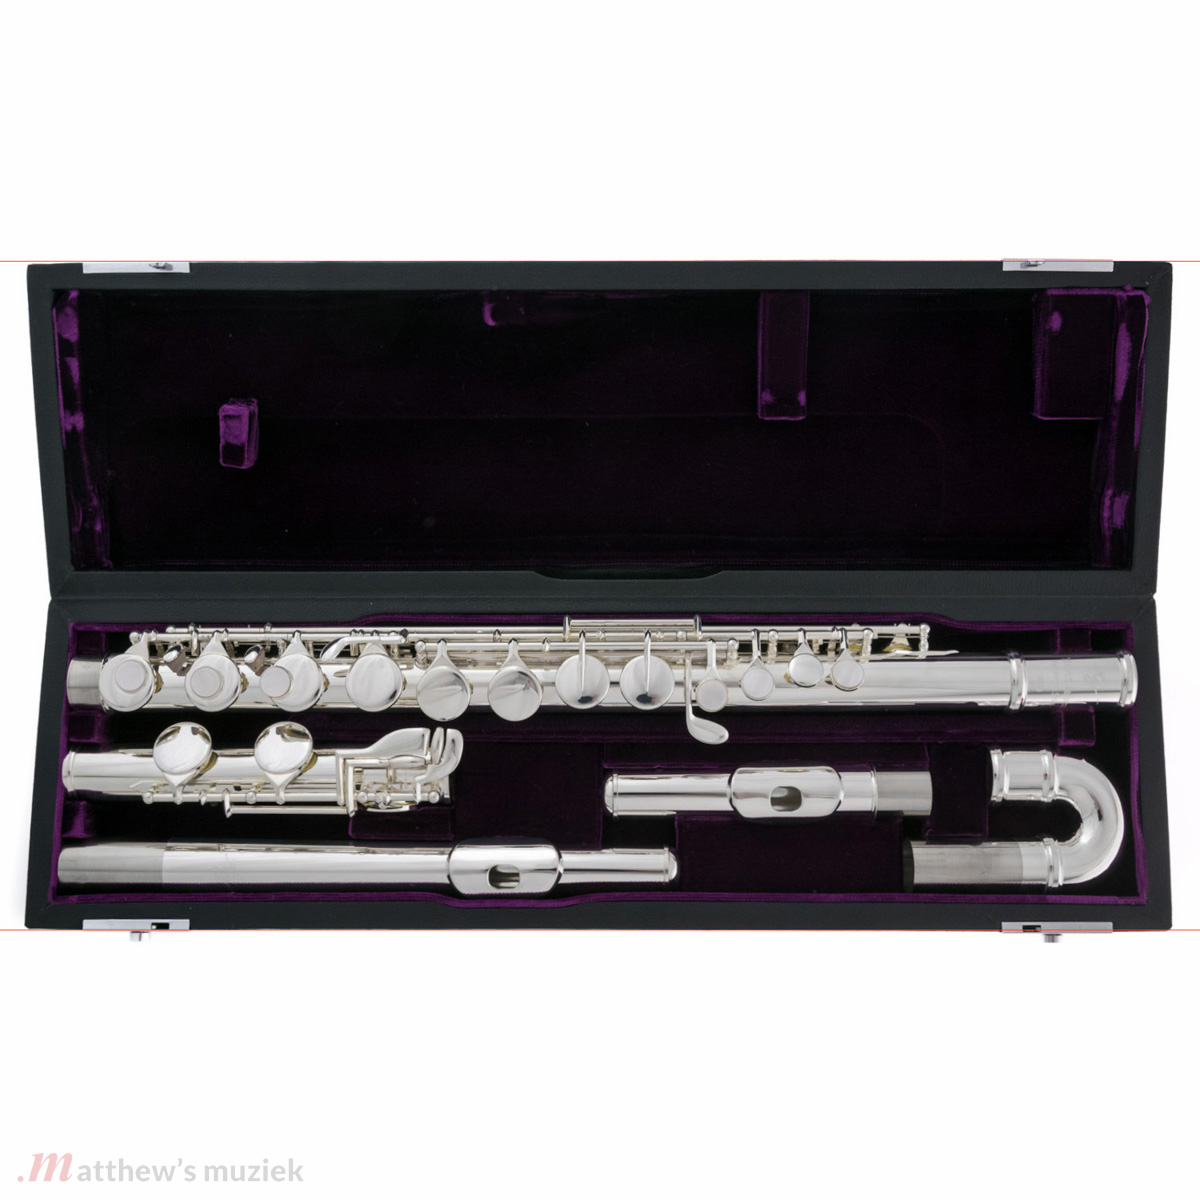 Trevor James Alto Flute - Performers Serie + Straight and Curved Head Joints - 33223 CD